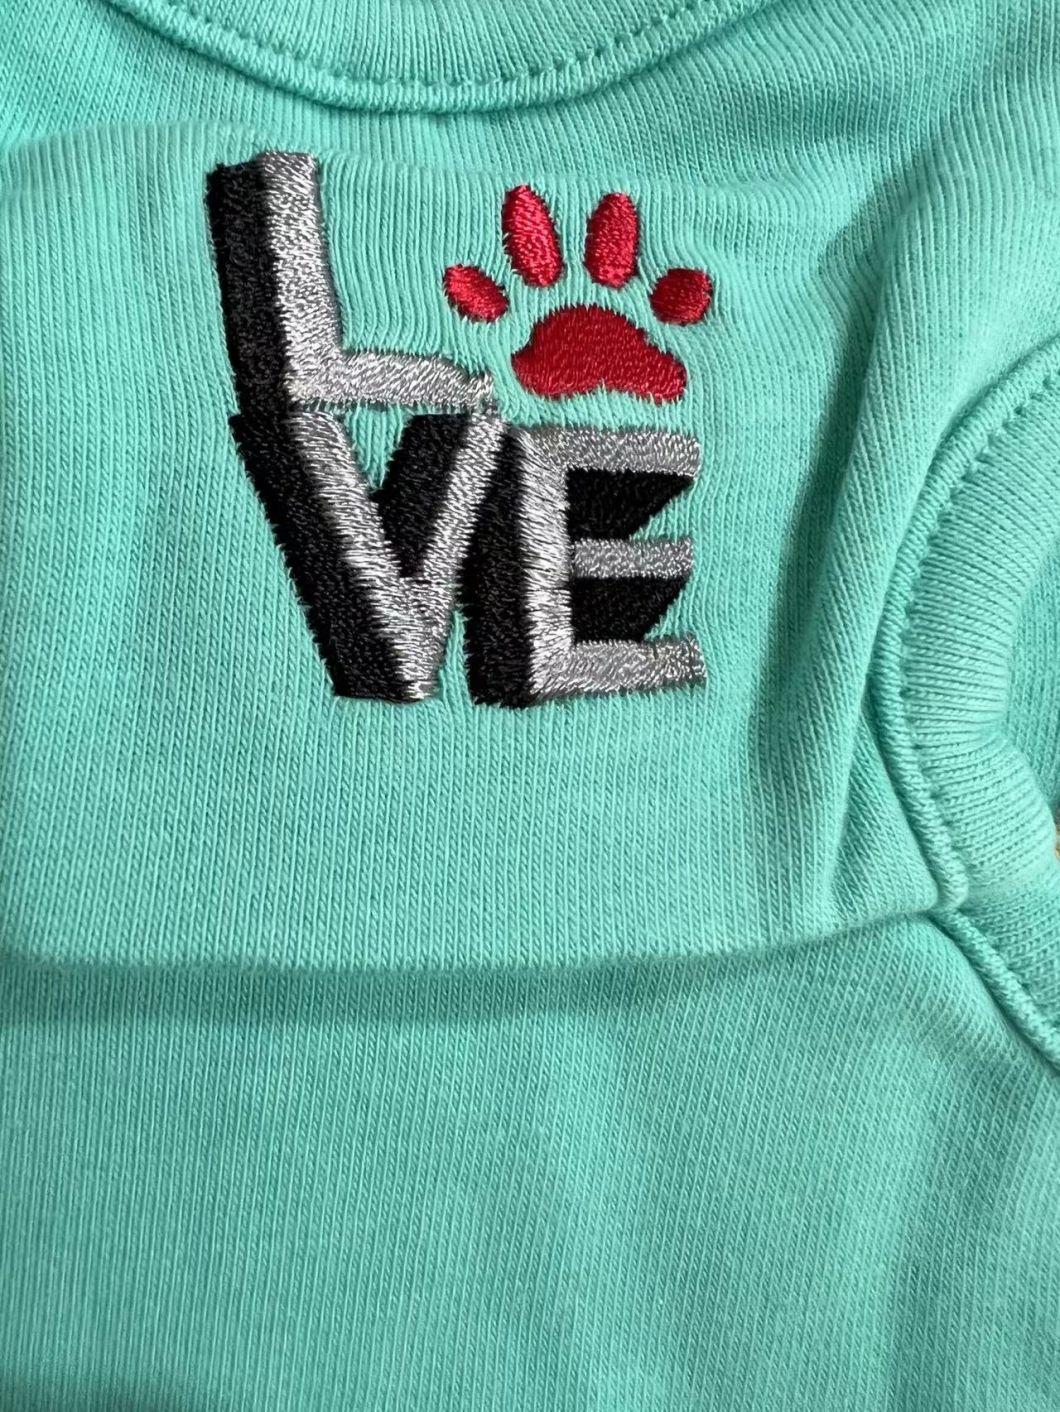 Lve Trading Company Pet Shirt Products Dog Clothes Dog Clothing Designer Clothes